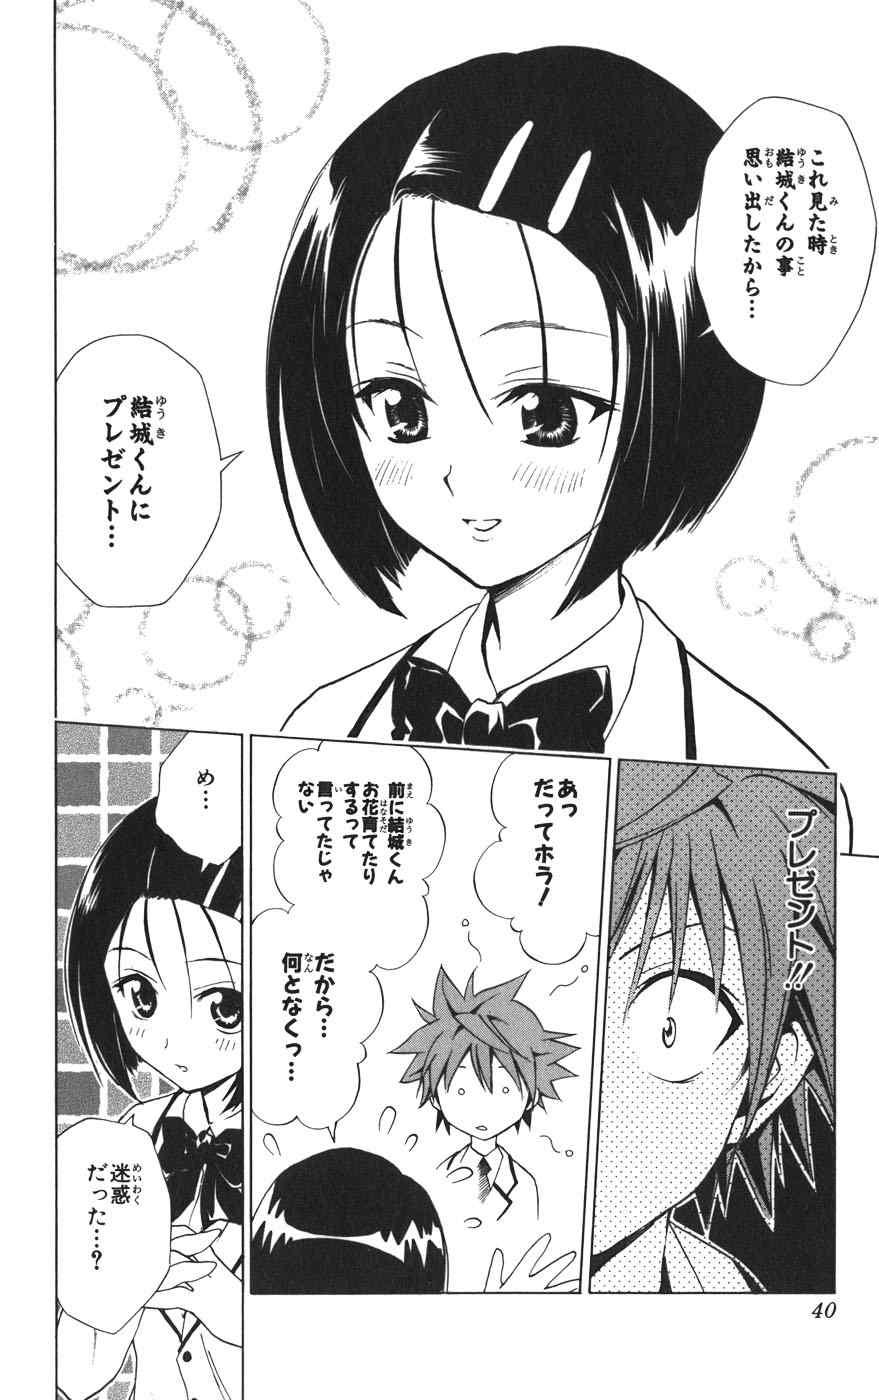 《To LOVEるとらぶる》漫画 To LOVE 04卷